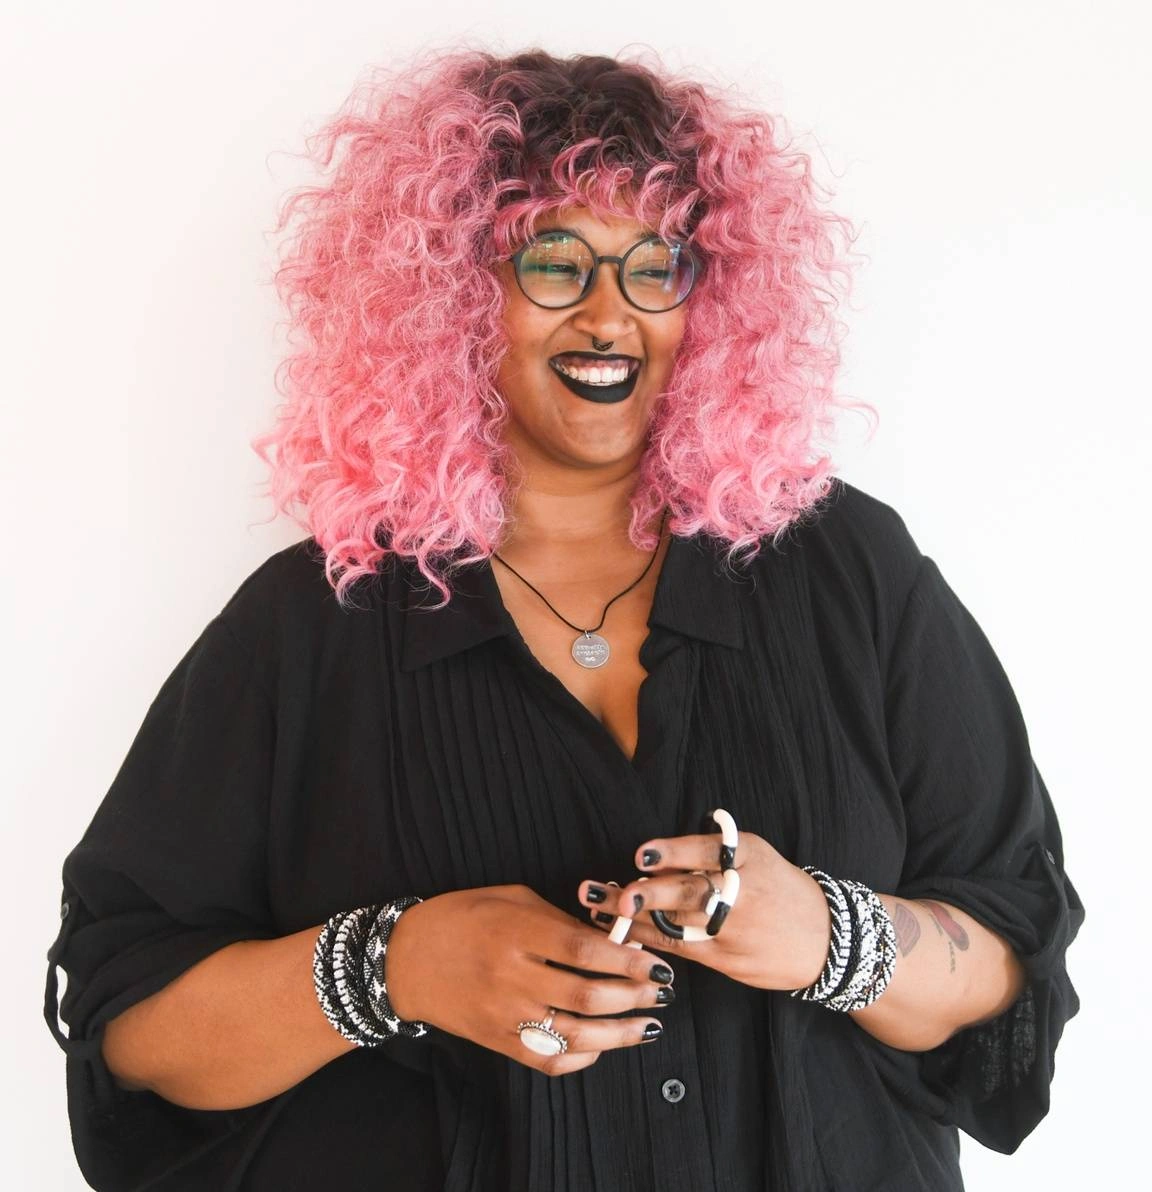 Woman with pink hair smiling.